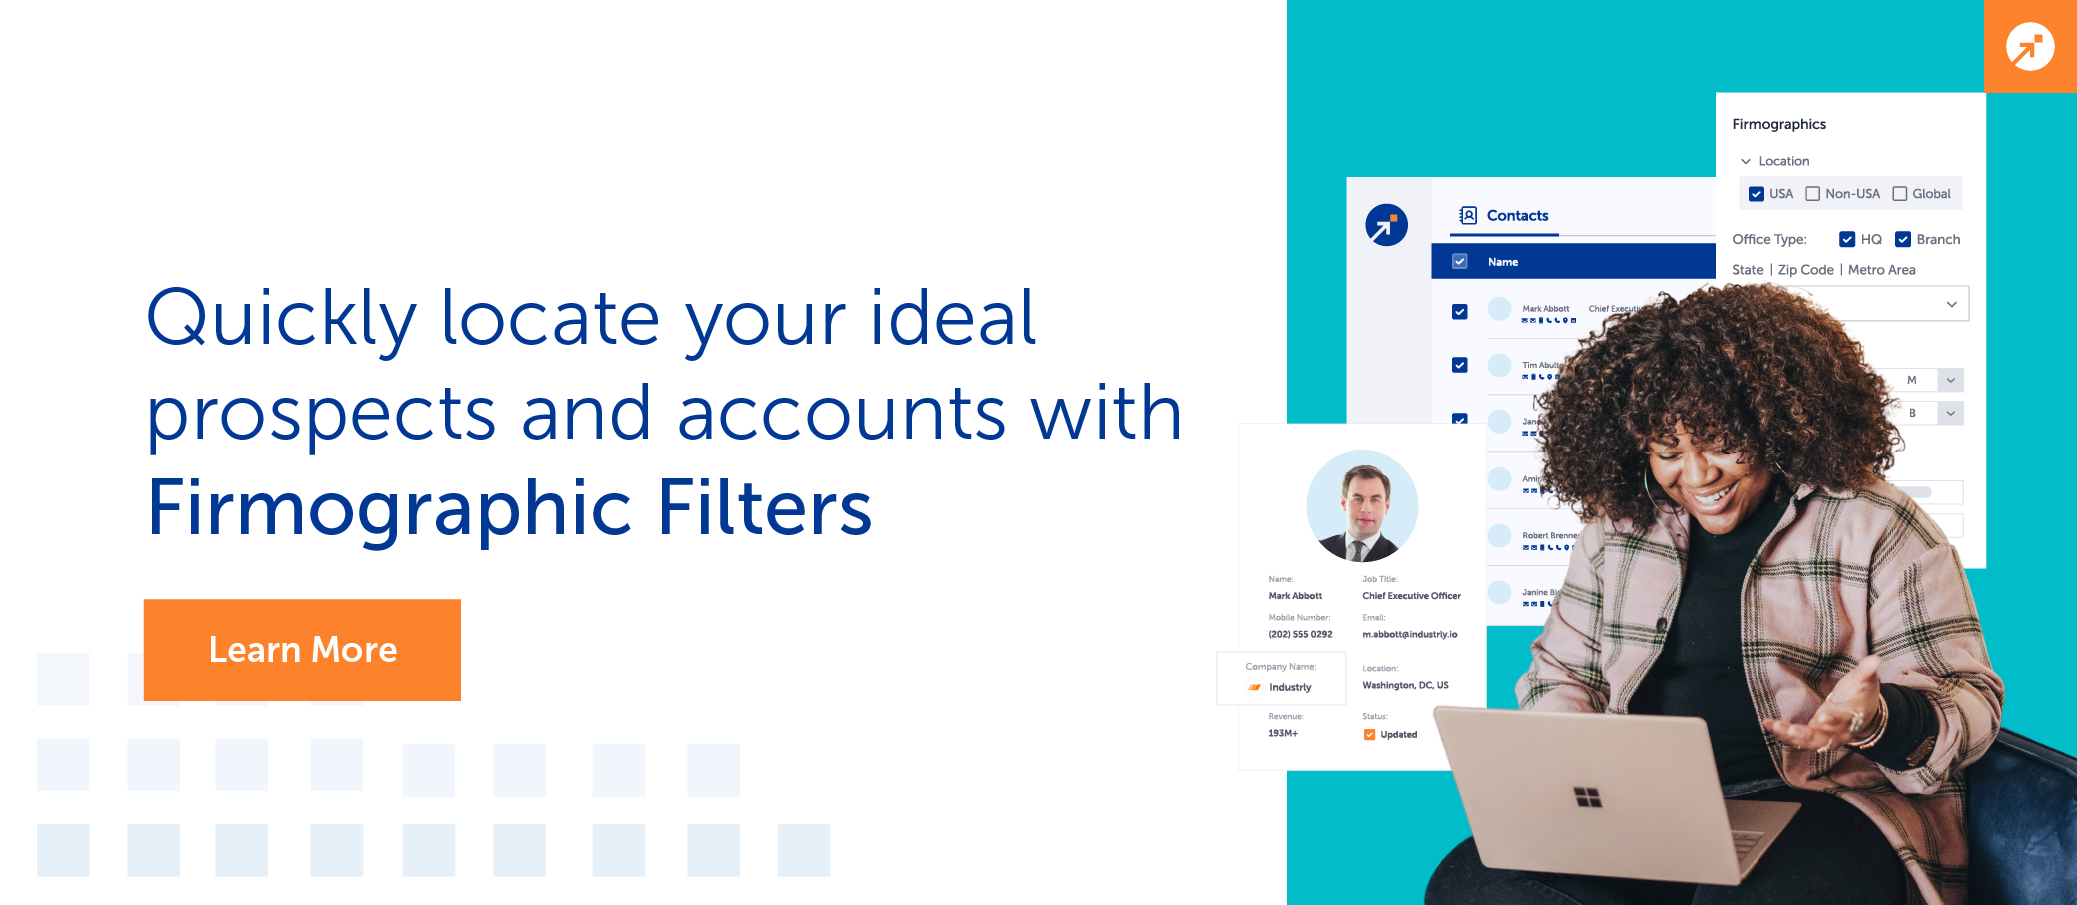 Quickly locate your ideal prospects and accounts with Firmographic Filters